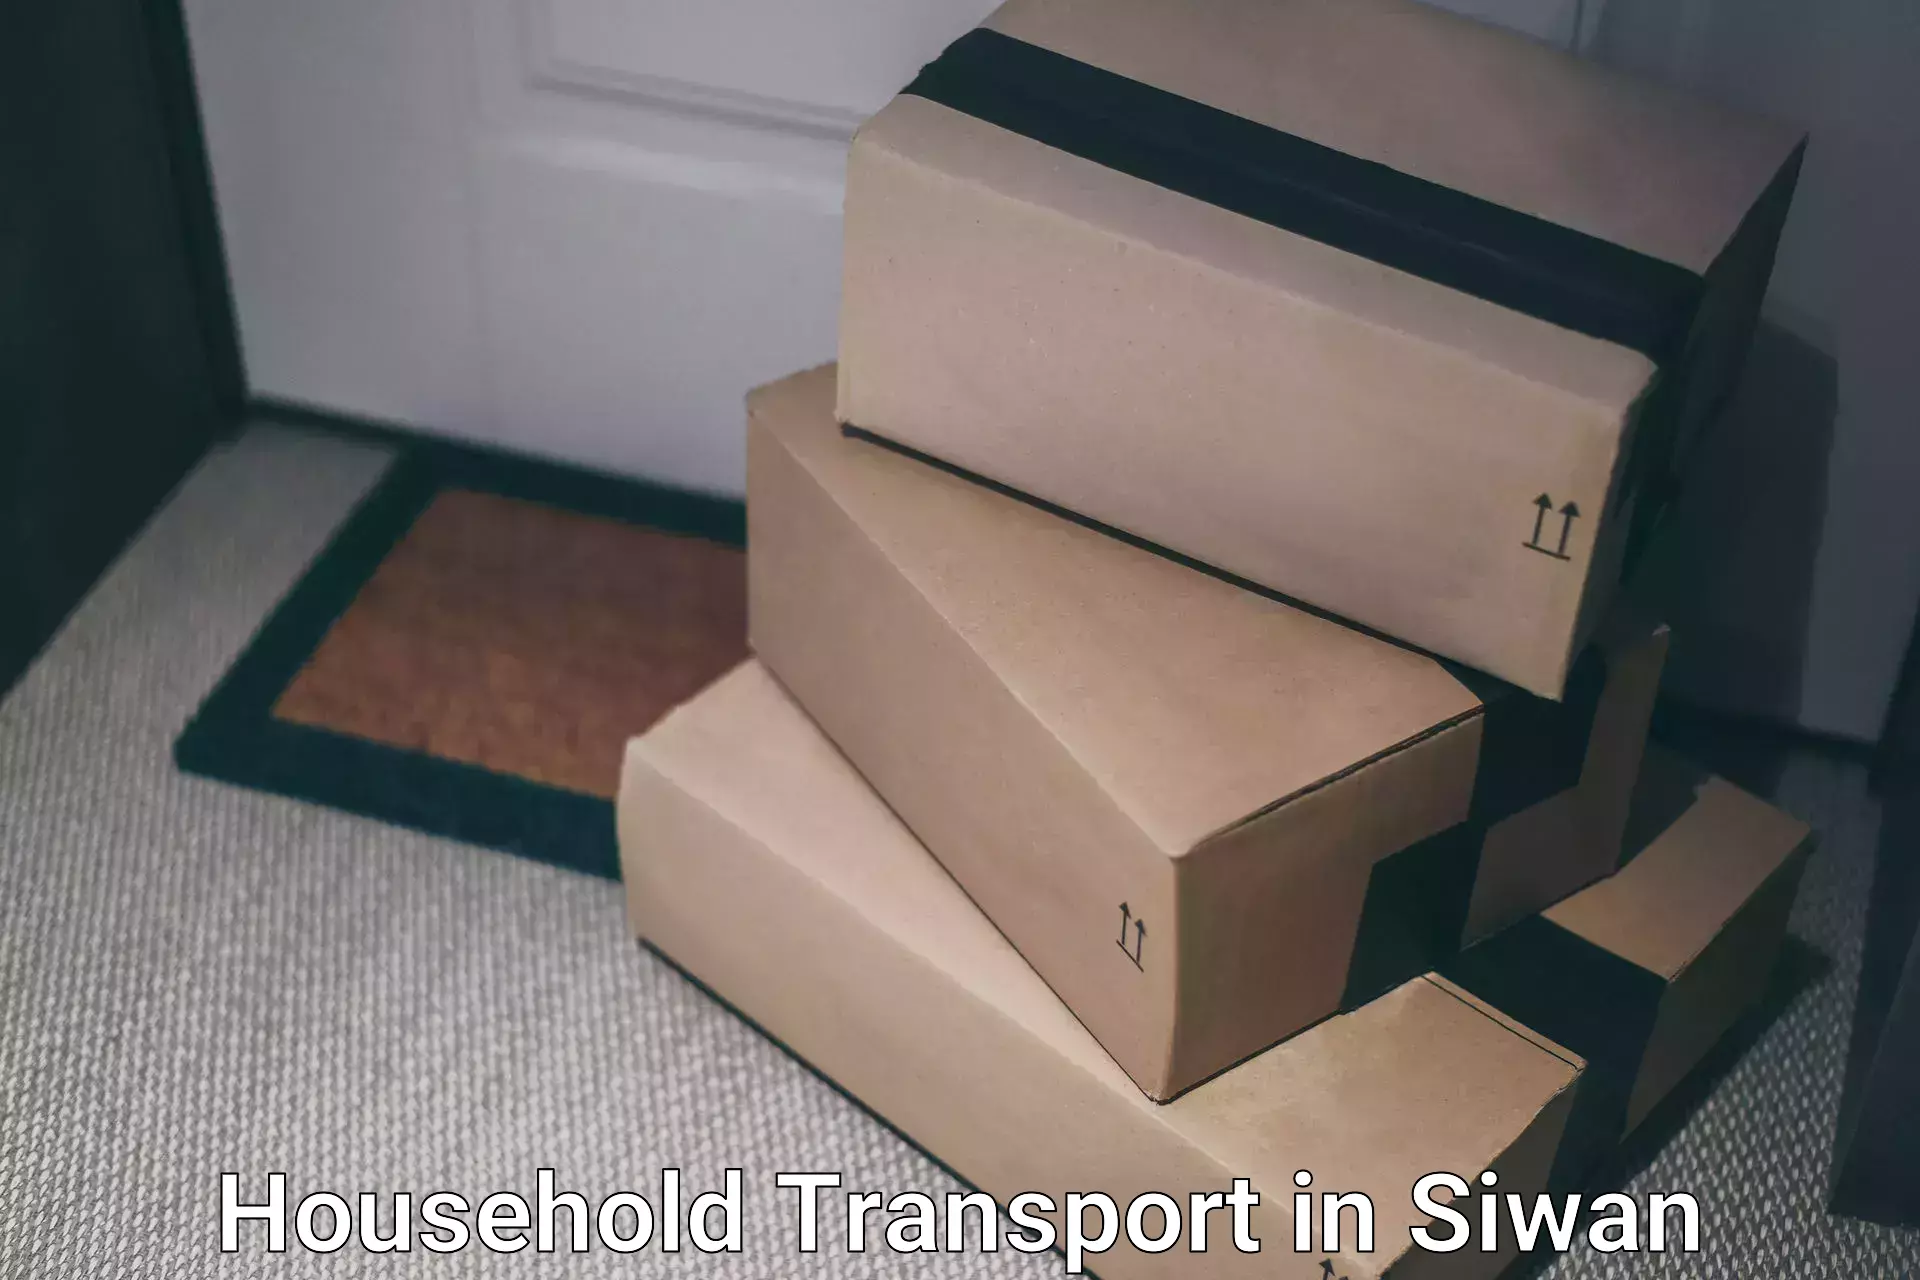 Quality relocation services in Siwan